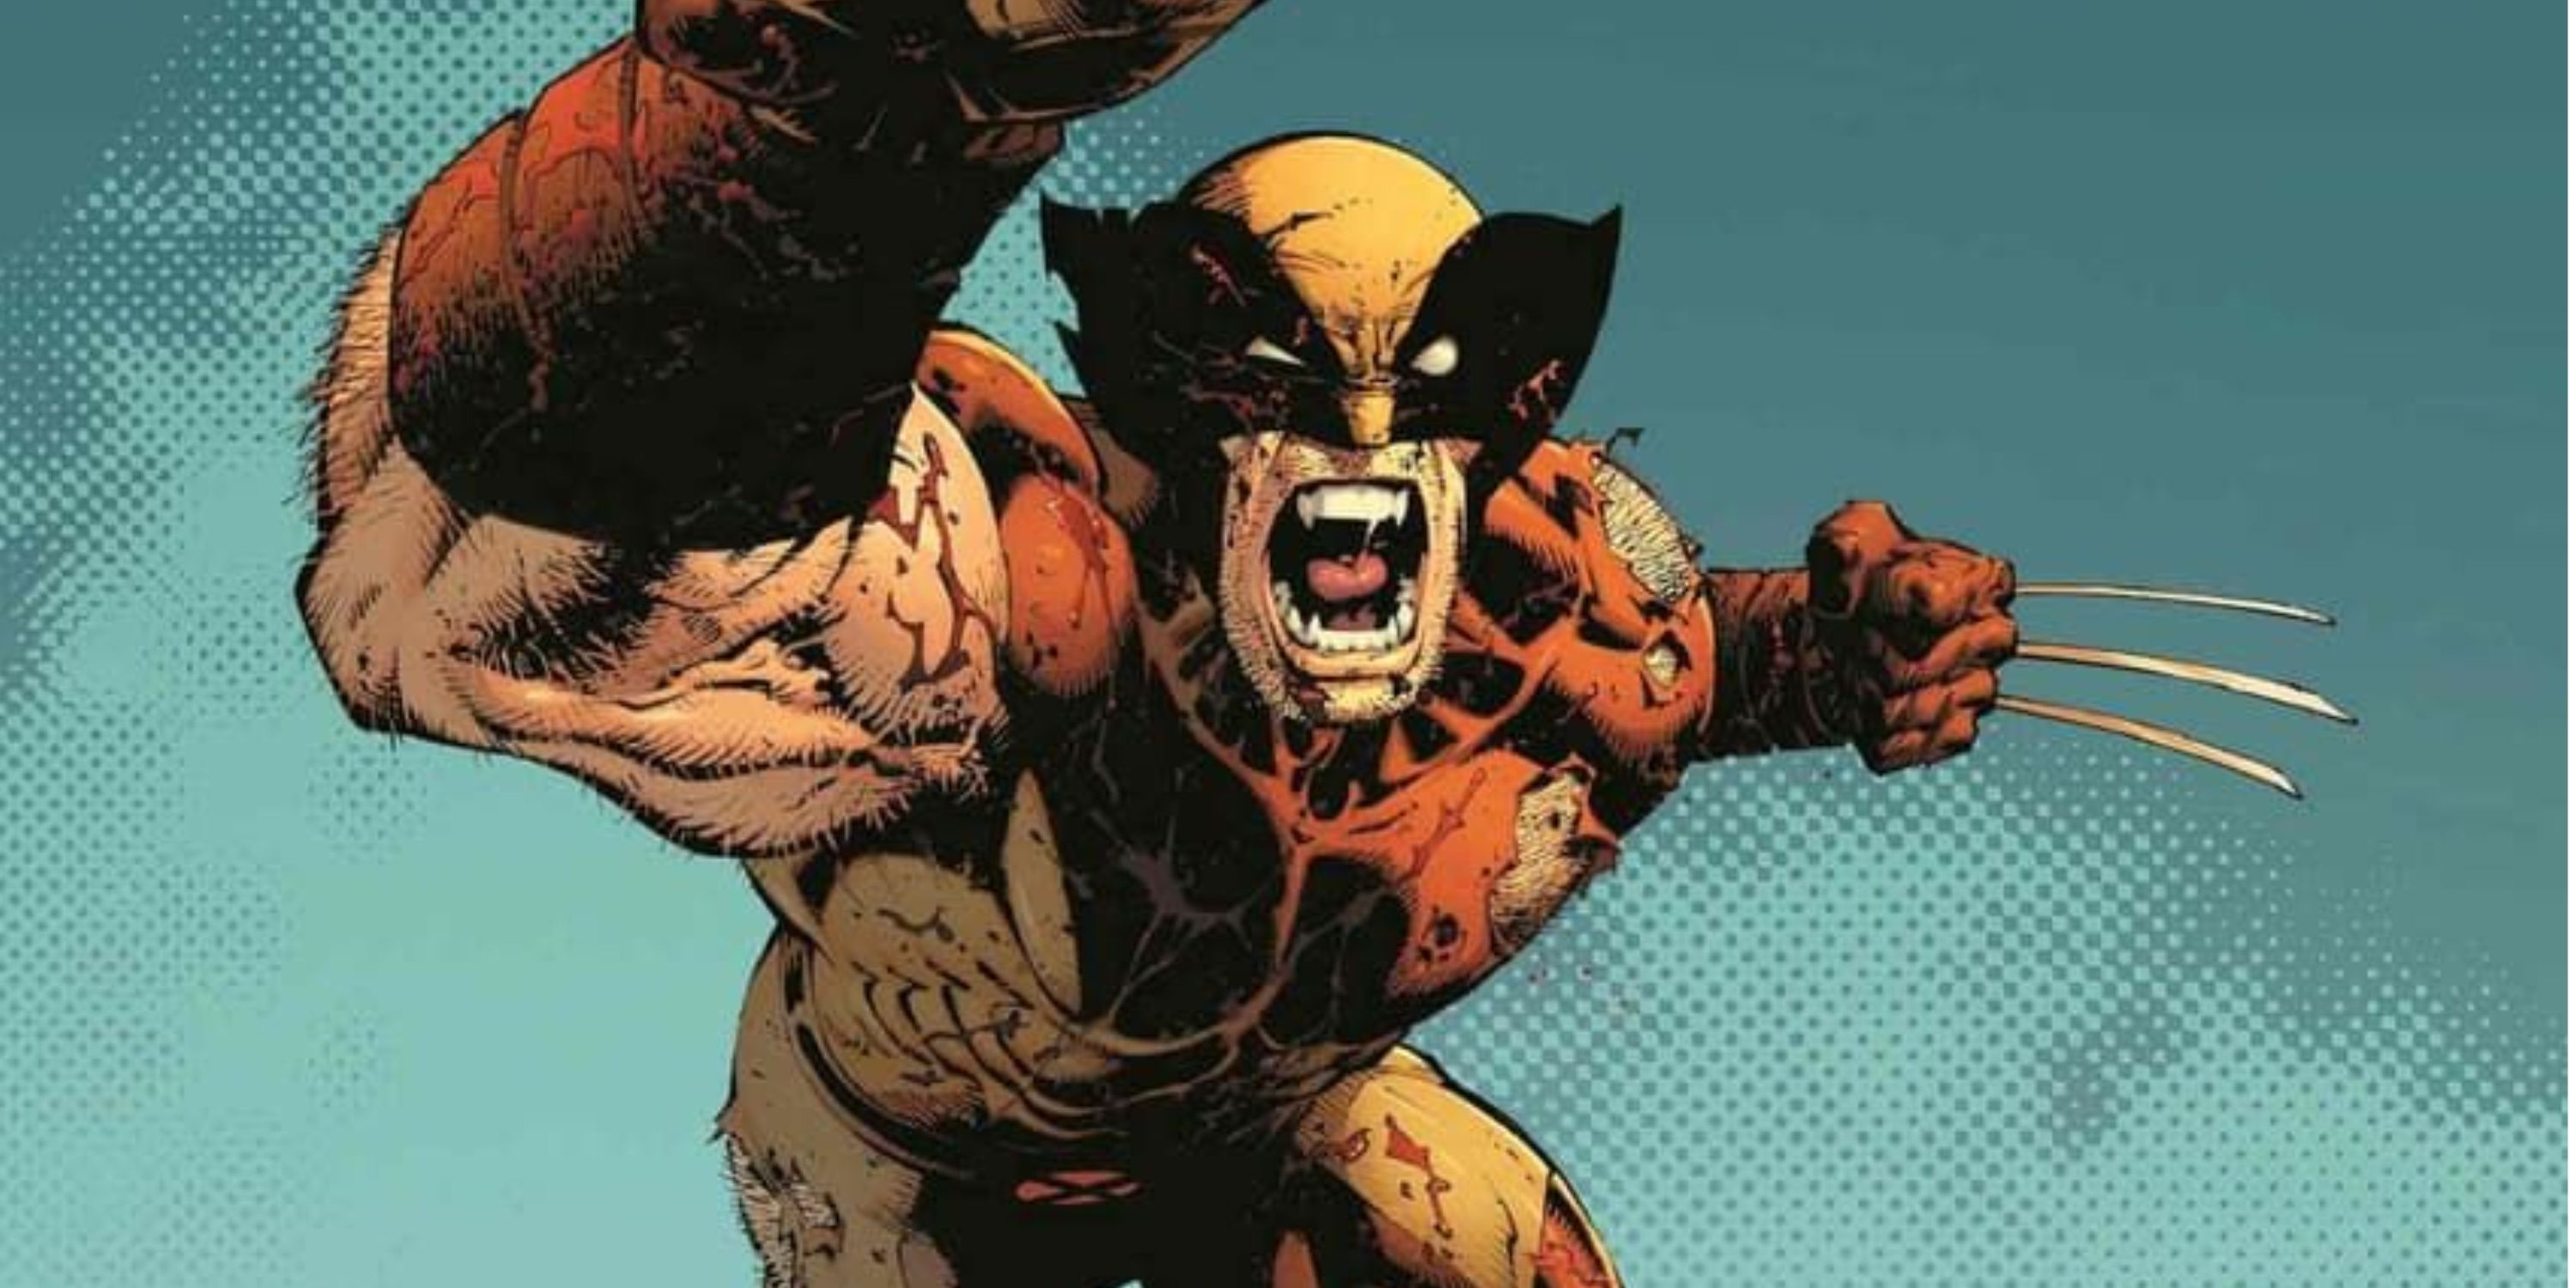 Wolverine jumps forward, ready for battle, in Marvel Comics